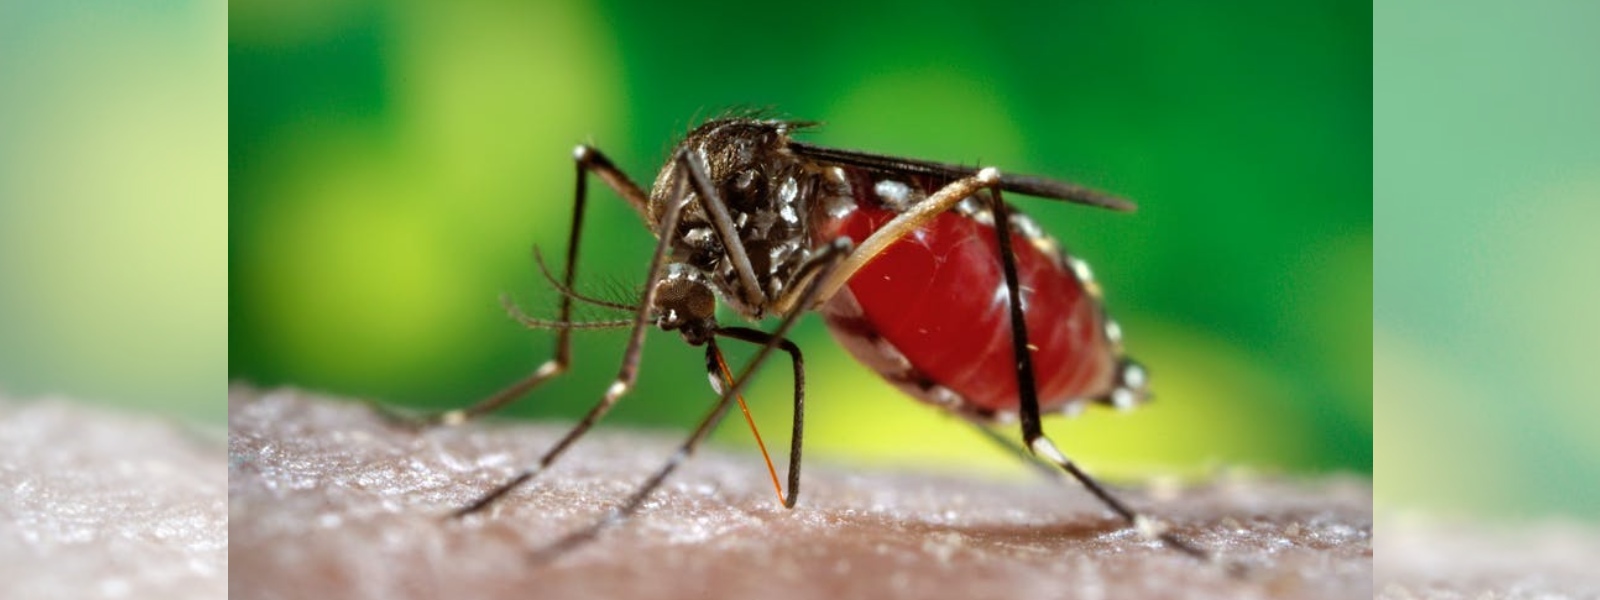 NDCU to implement dengue eradication program amidst spike in cases